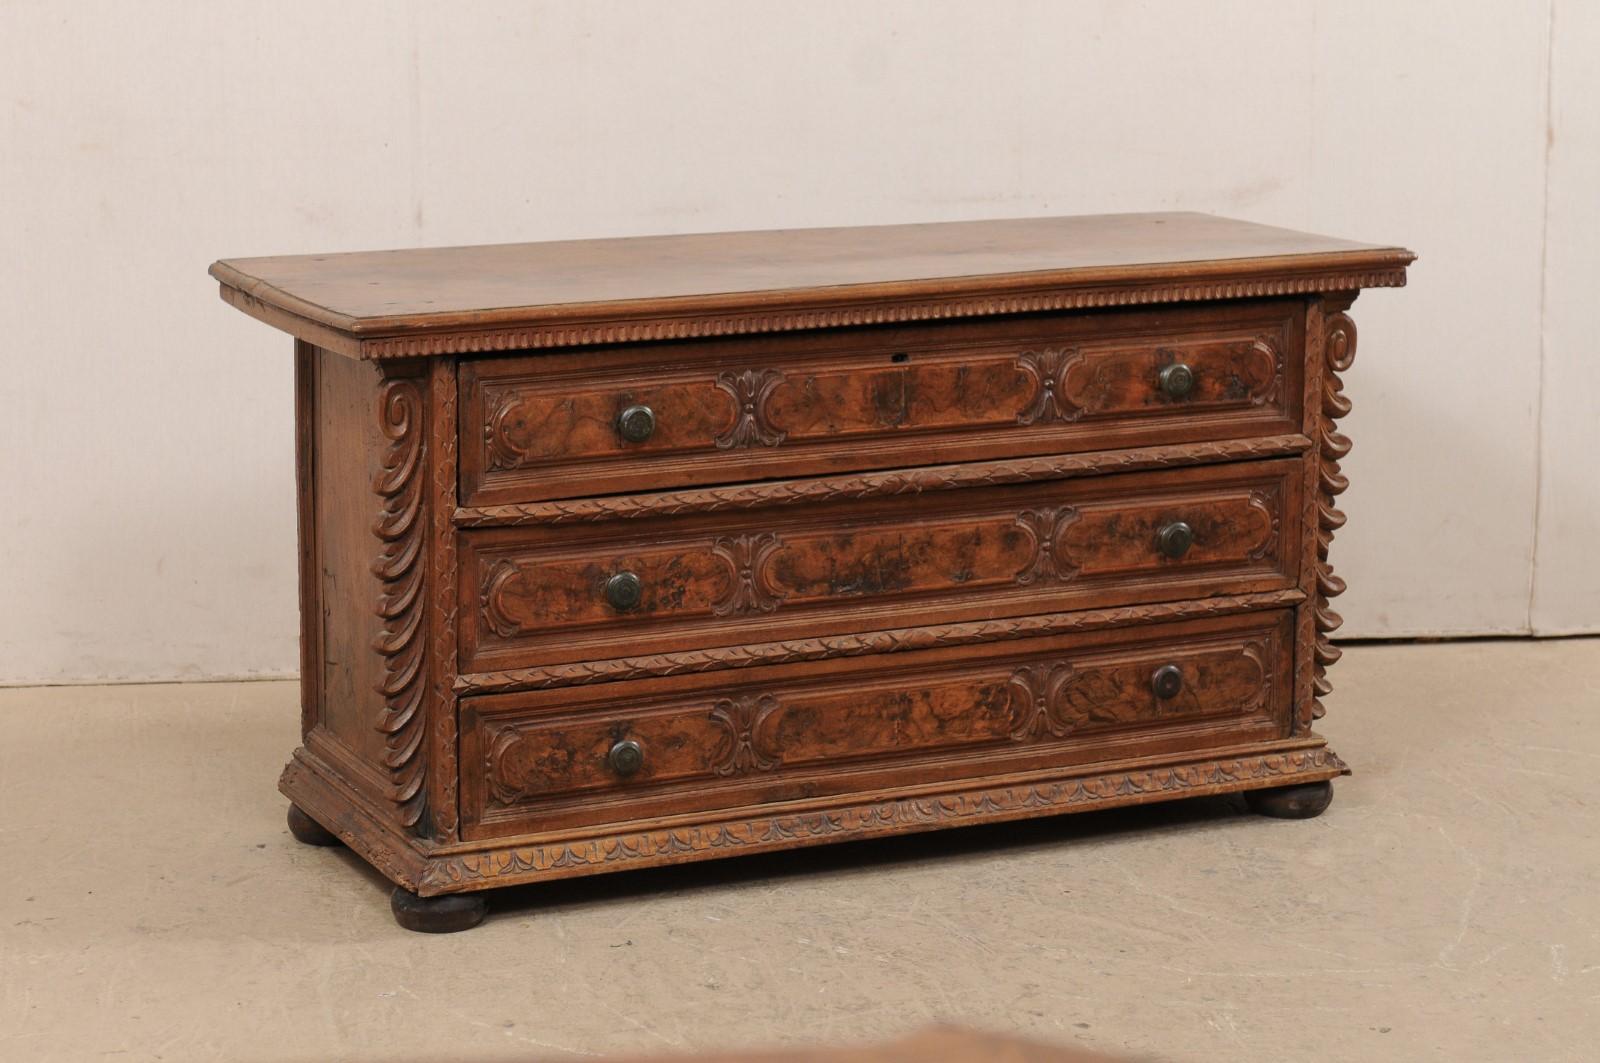 A fabulous Italian carved walnut wood chest of three drawers from the early 18th century. This antique commode from Italy is exquisitely flanked with a pair of carved side posts with volute tops and curled leafy foliage which protrudes outward from